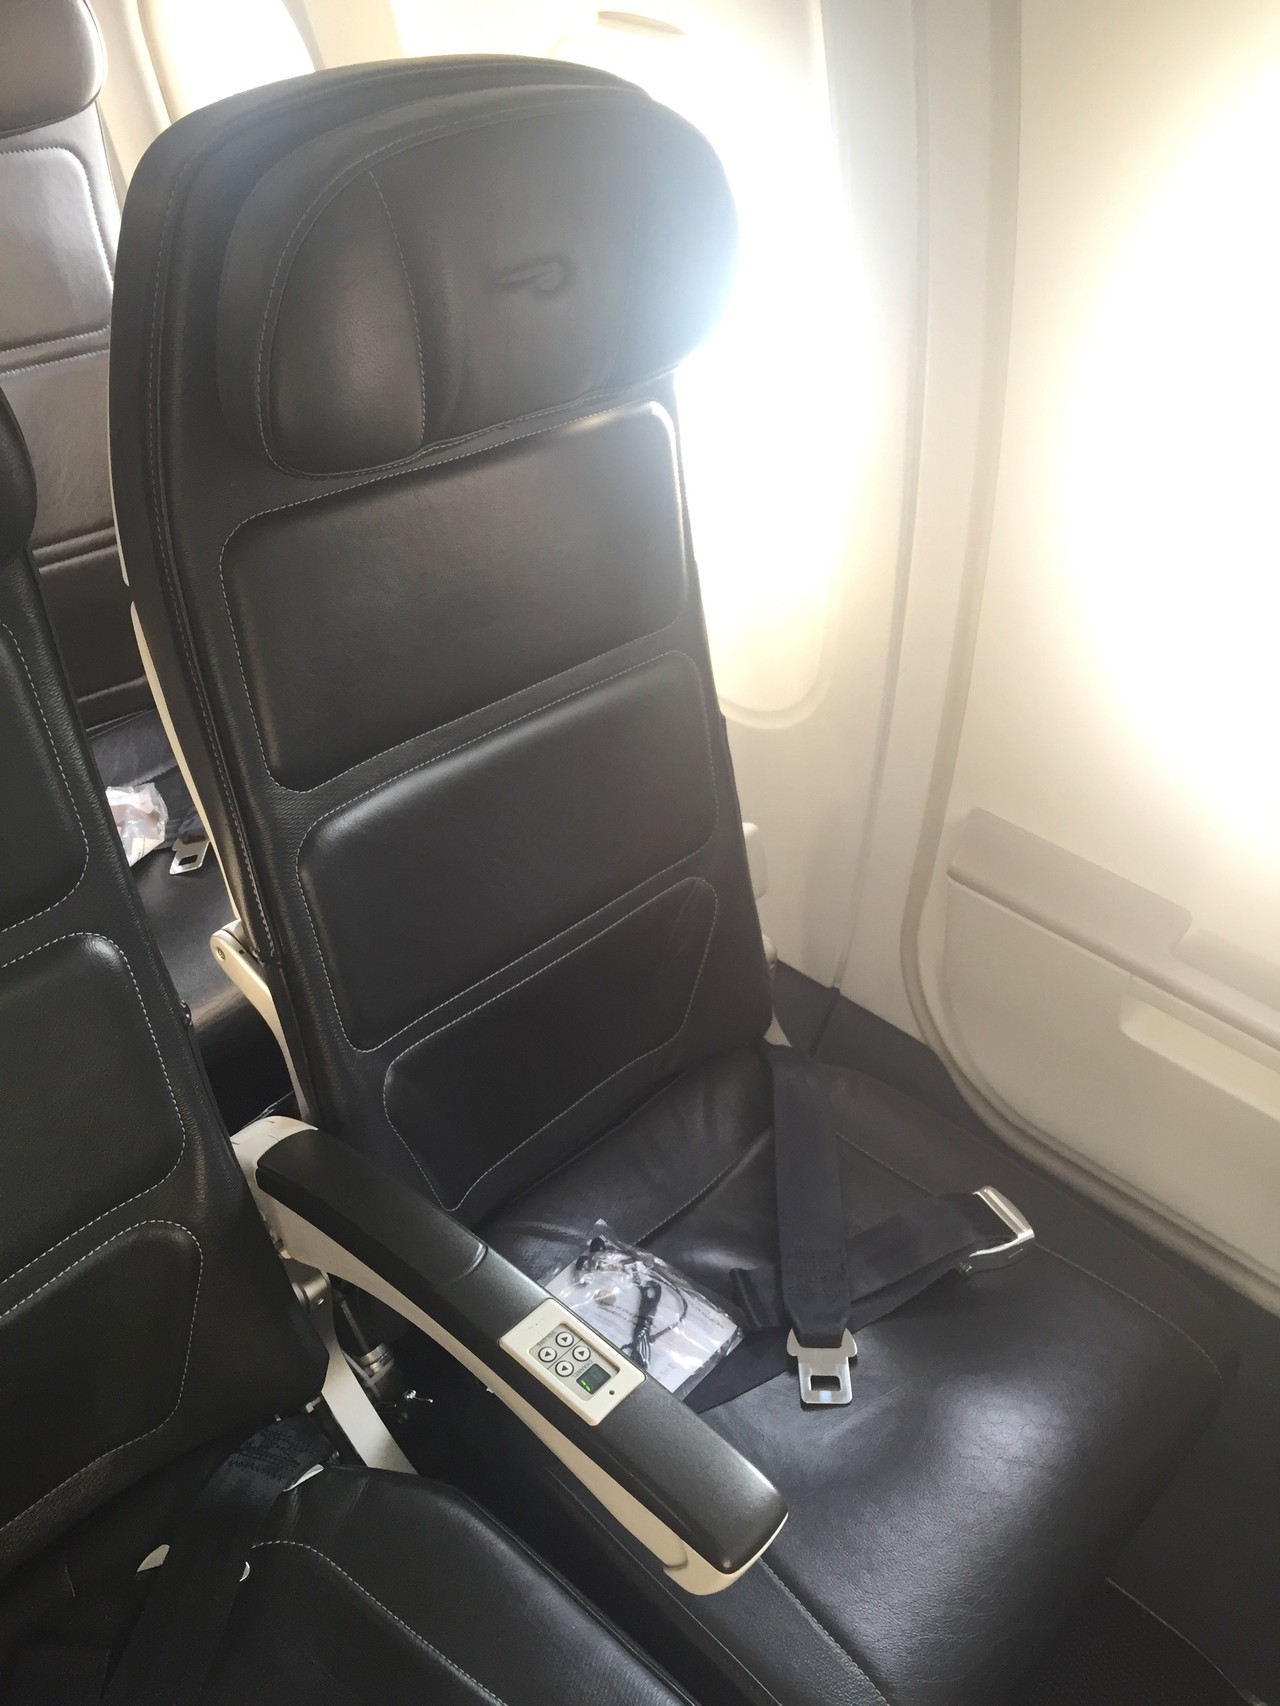 Review of British Airways flight from London to Istanbul in Economy